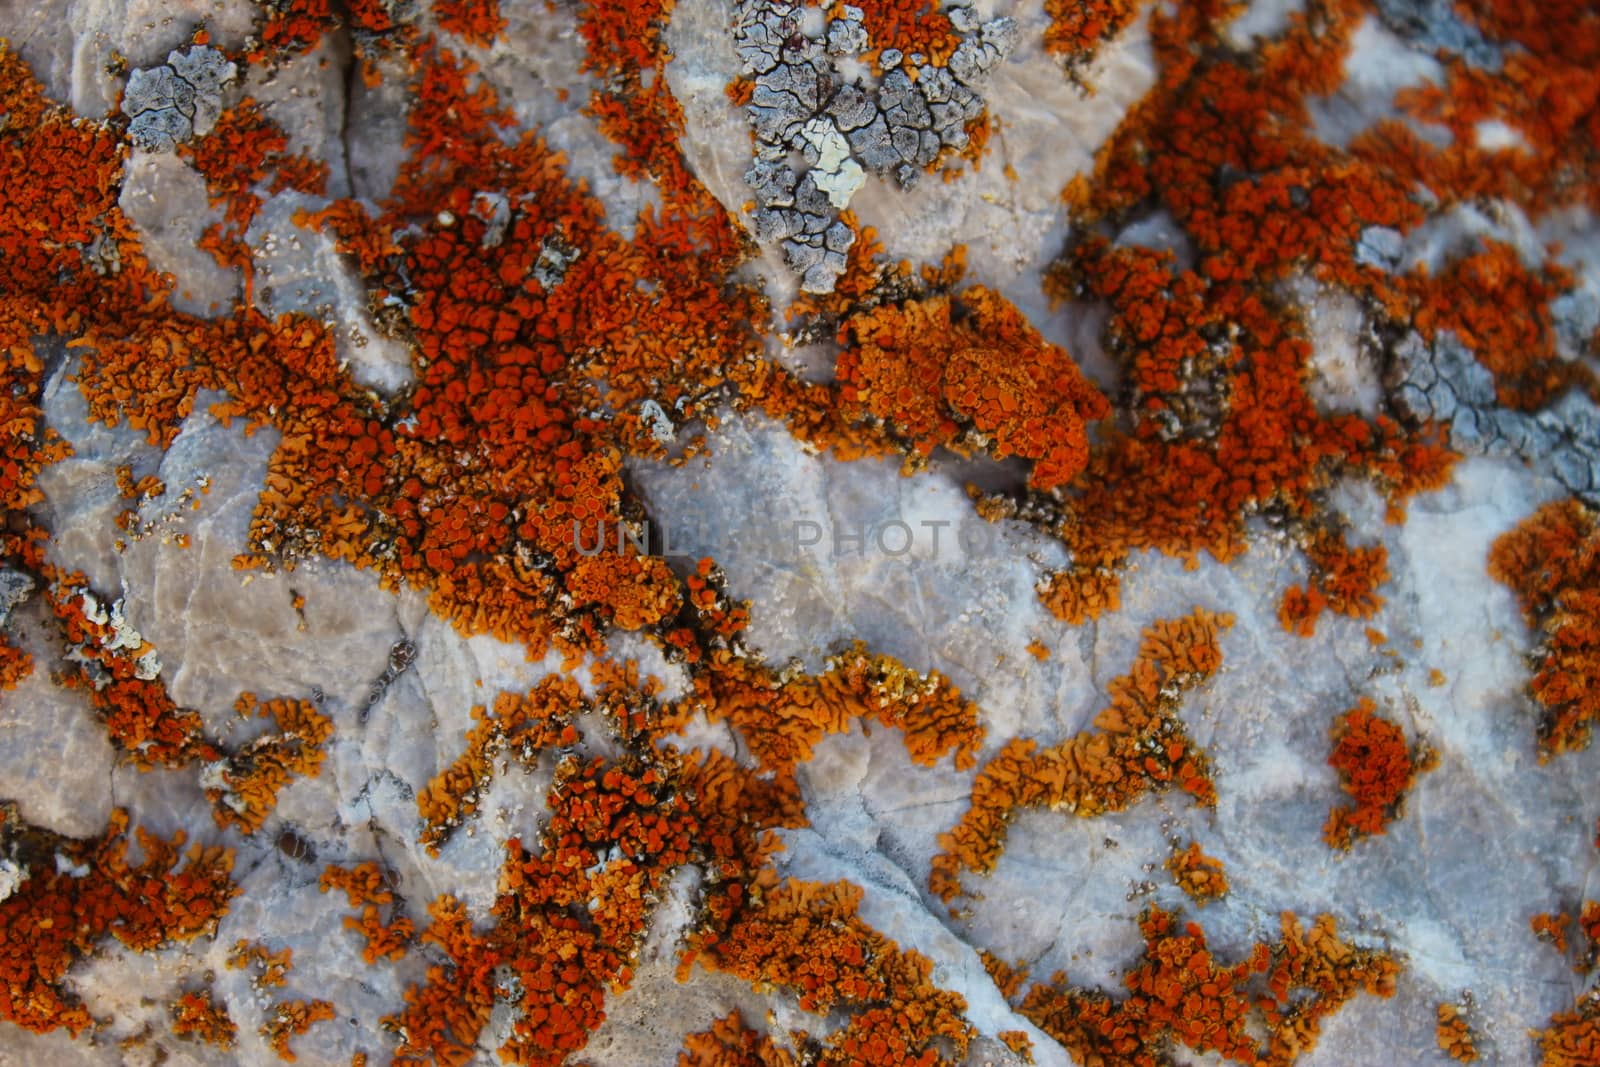 Many small colonies of orange lichen on the stone. On the mountain Bjelasnica, Bosnia and Herzegovina.